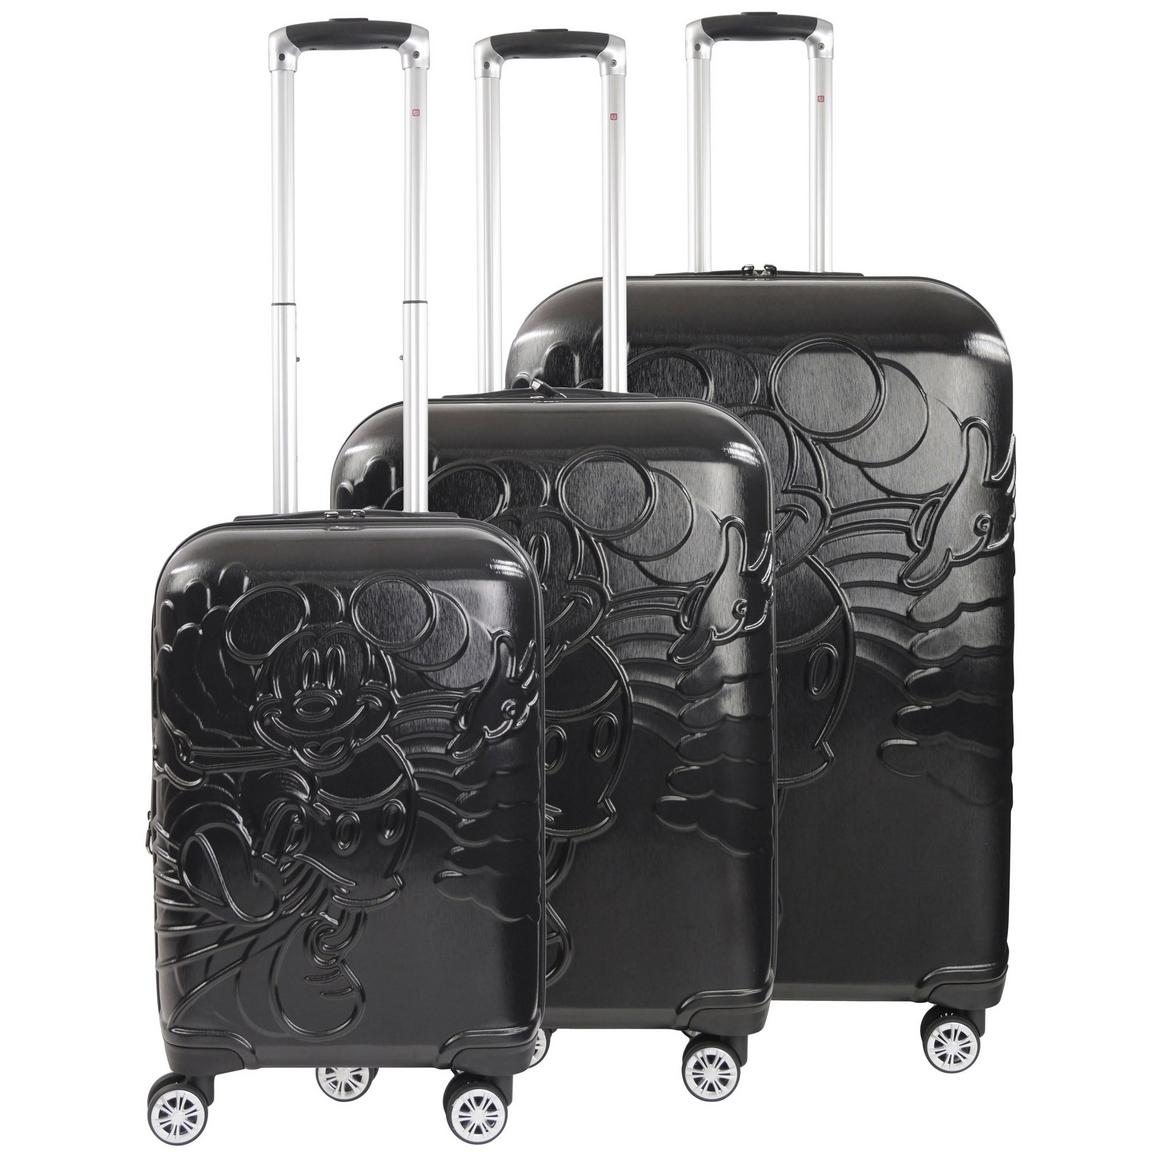 Concept One Disney Ful Running Mickey Mouse Molded Hard-Sided Carry-On Luggage 3-Piece Set - Black